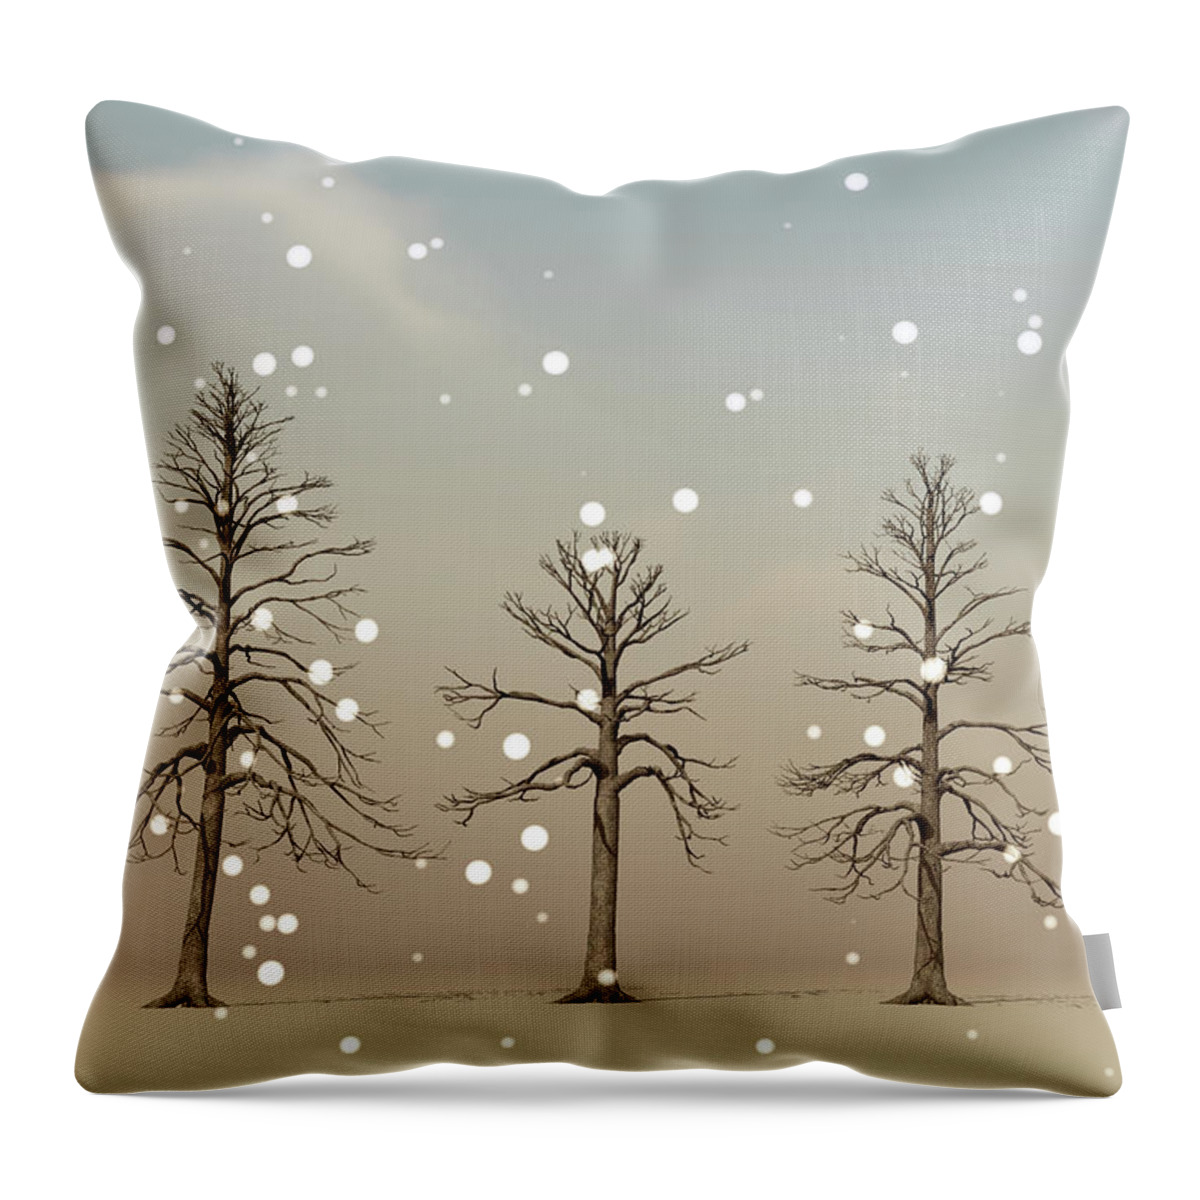 Partly Cloudy Throw Pillow featuring the digital art Partly Cloudy Chance Of Snow by Bob Orsillo